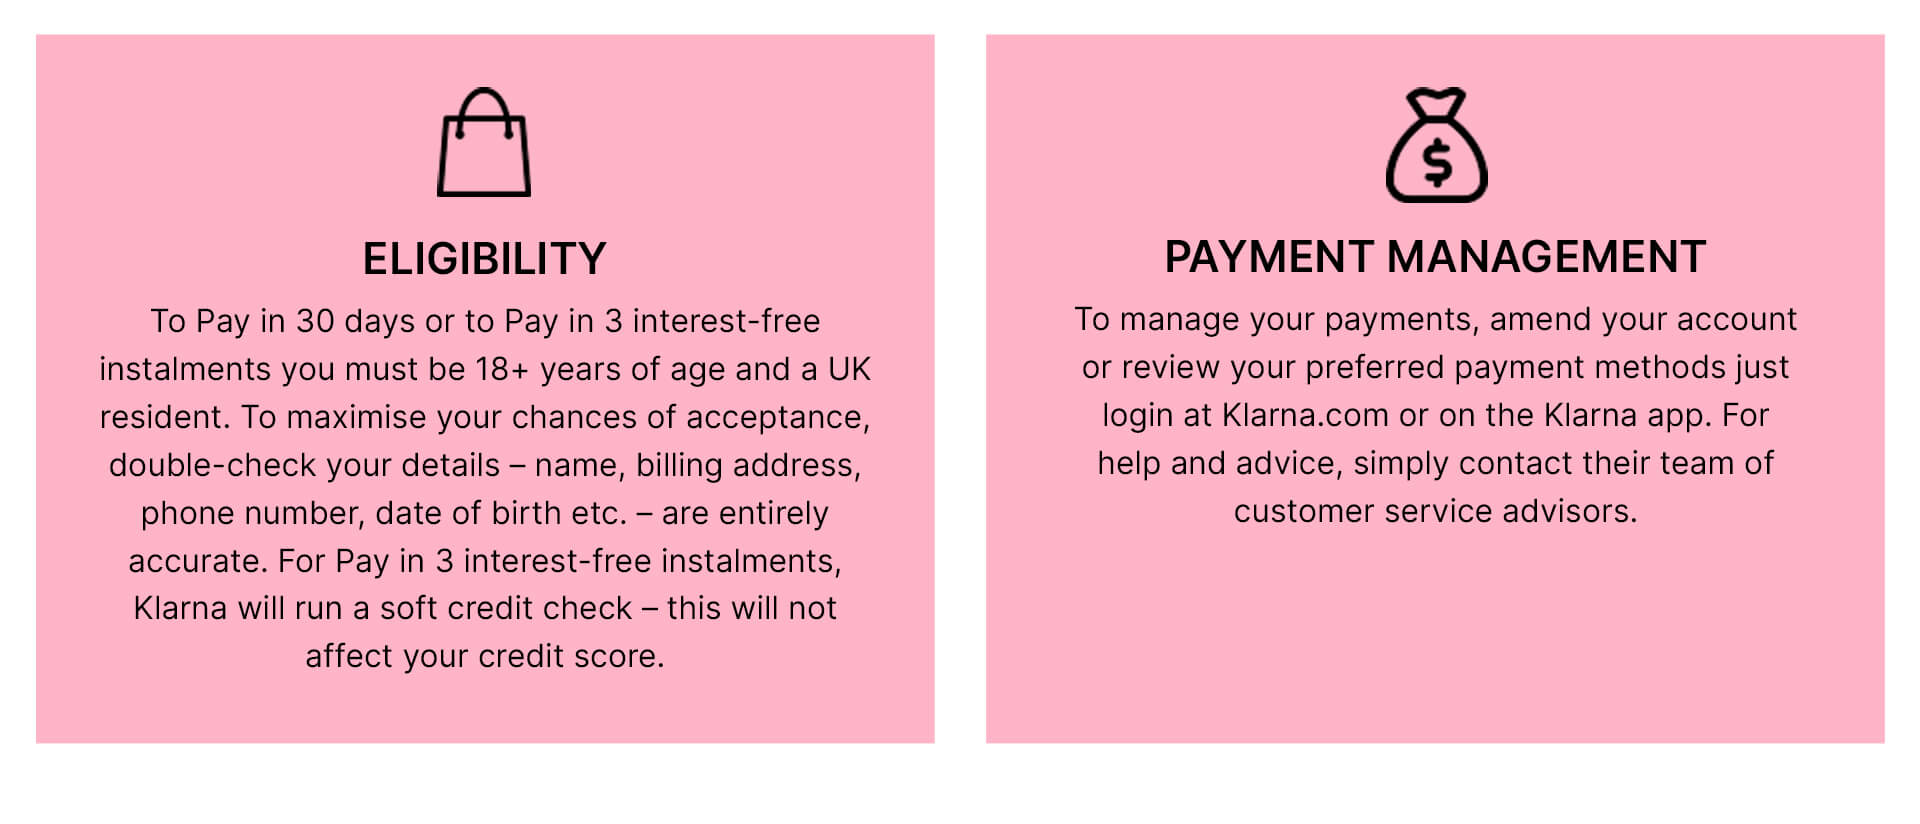 eligibility: to pay in 30 days or to pay in 3 interest-free instalments you must be 18+ years of age and a UK resident. To maximise your chances of acceptance, double check your details - name, billing address, phone number, date of birth etc. - are entirely accurate. For Pay in 3 interest-free instalments, Klarna will run a soft credit check - this will not affect your credit score. Payment management: to manage your payments, amend your account or review your preferred payment methods just login at Klarna.com or on the Klarna app. For help and advice, simply contact their team of customer service advisors.